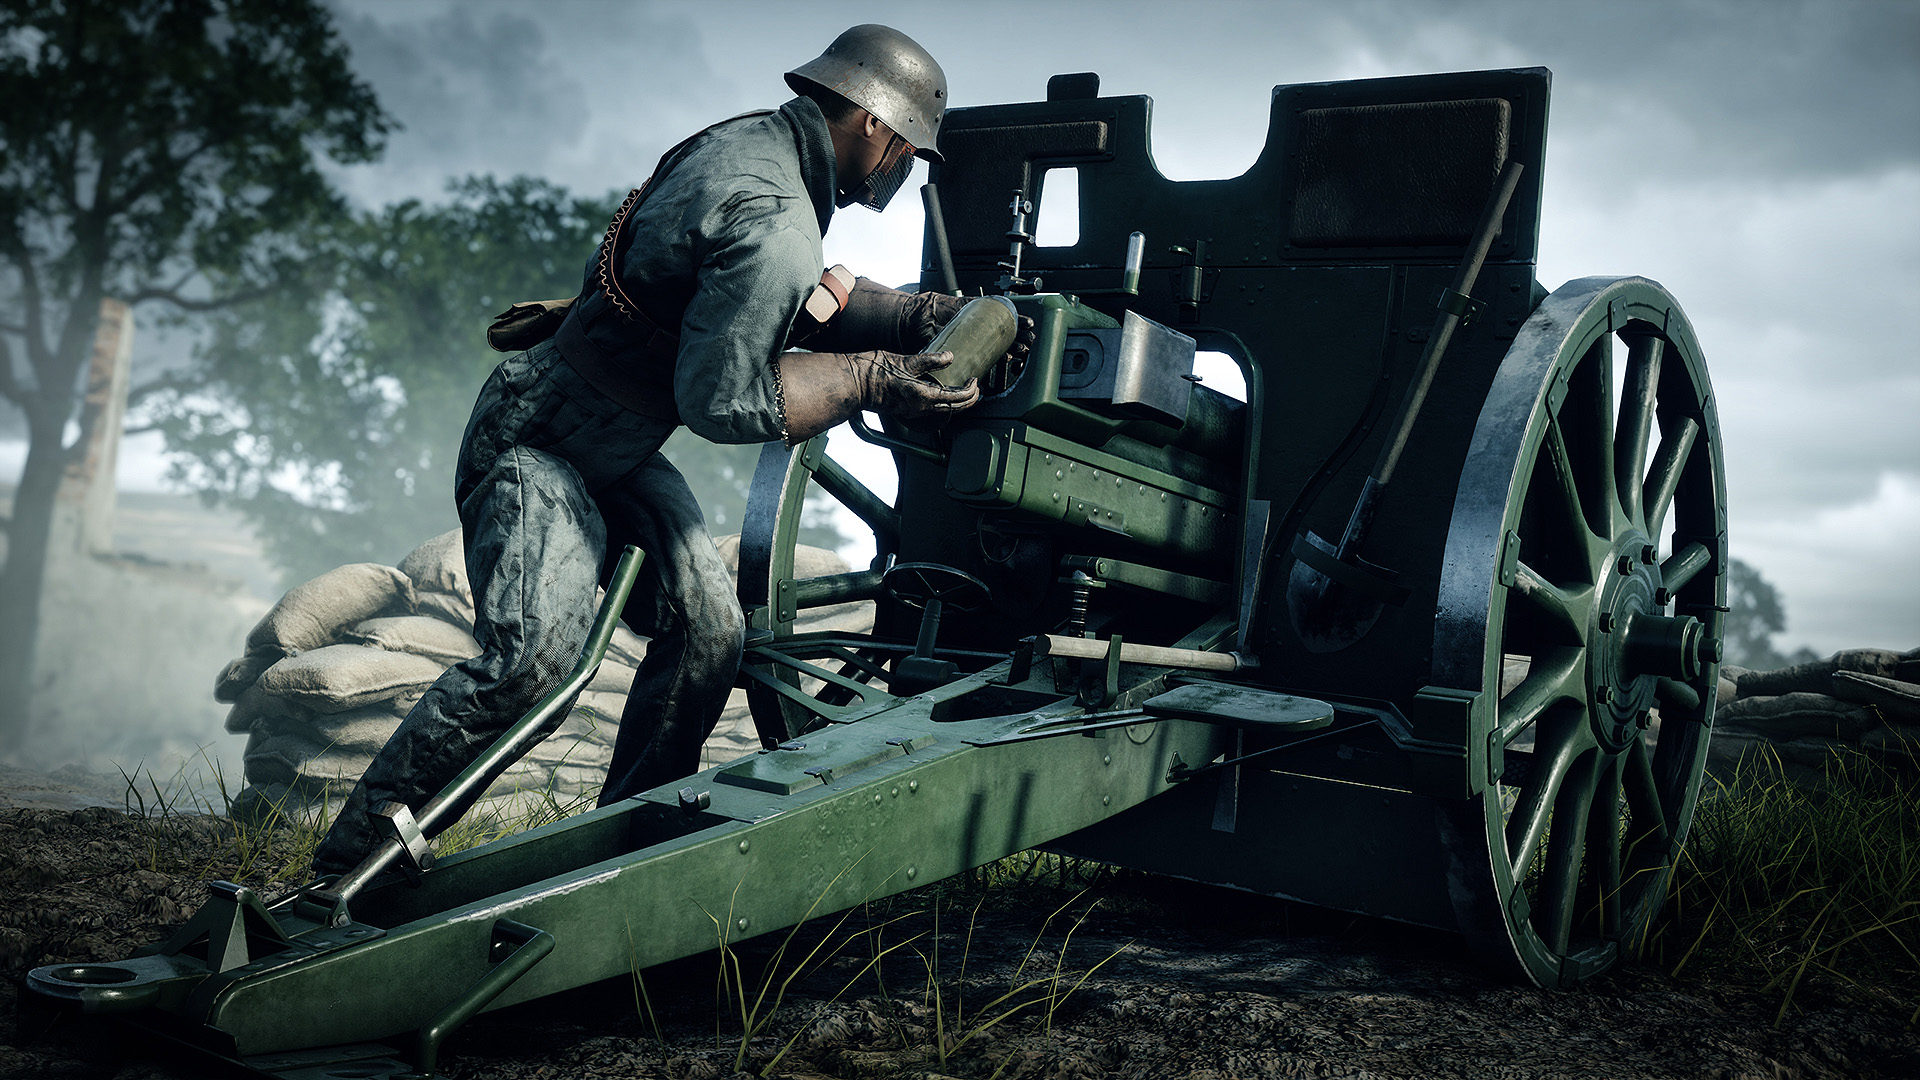 Battlefield 1 Brings History Back to Video Games